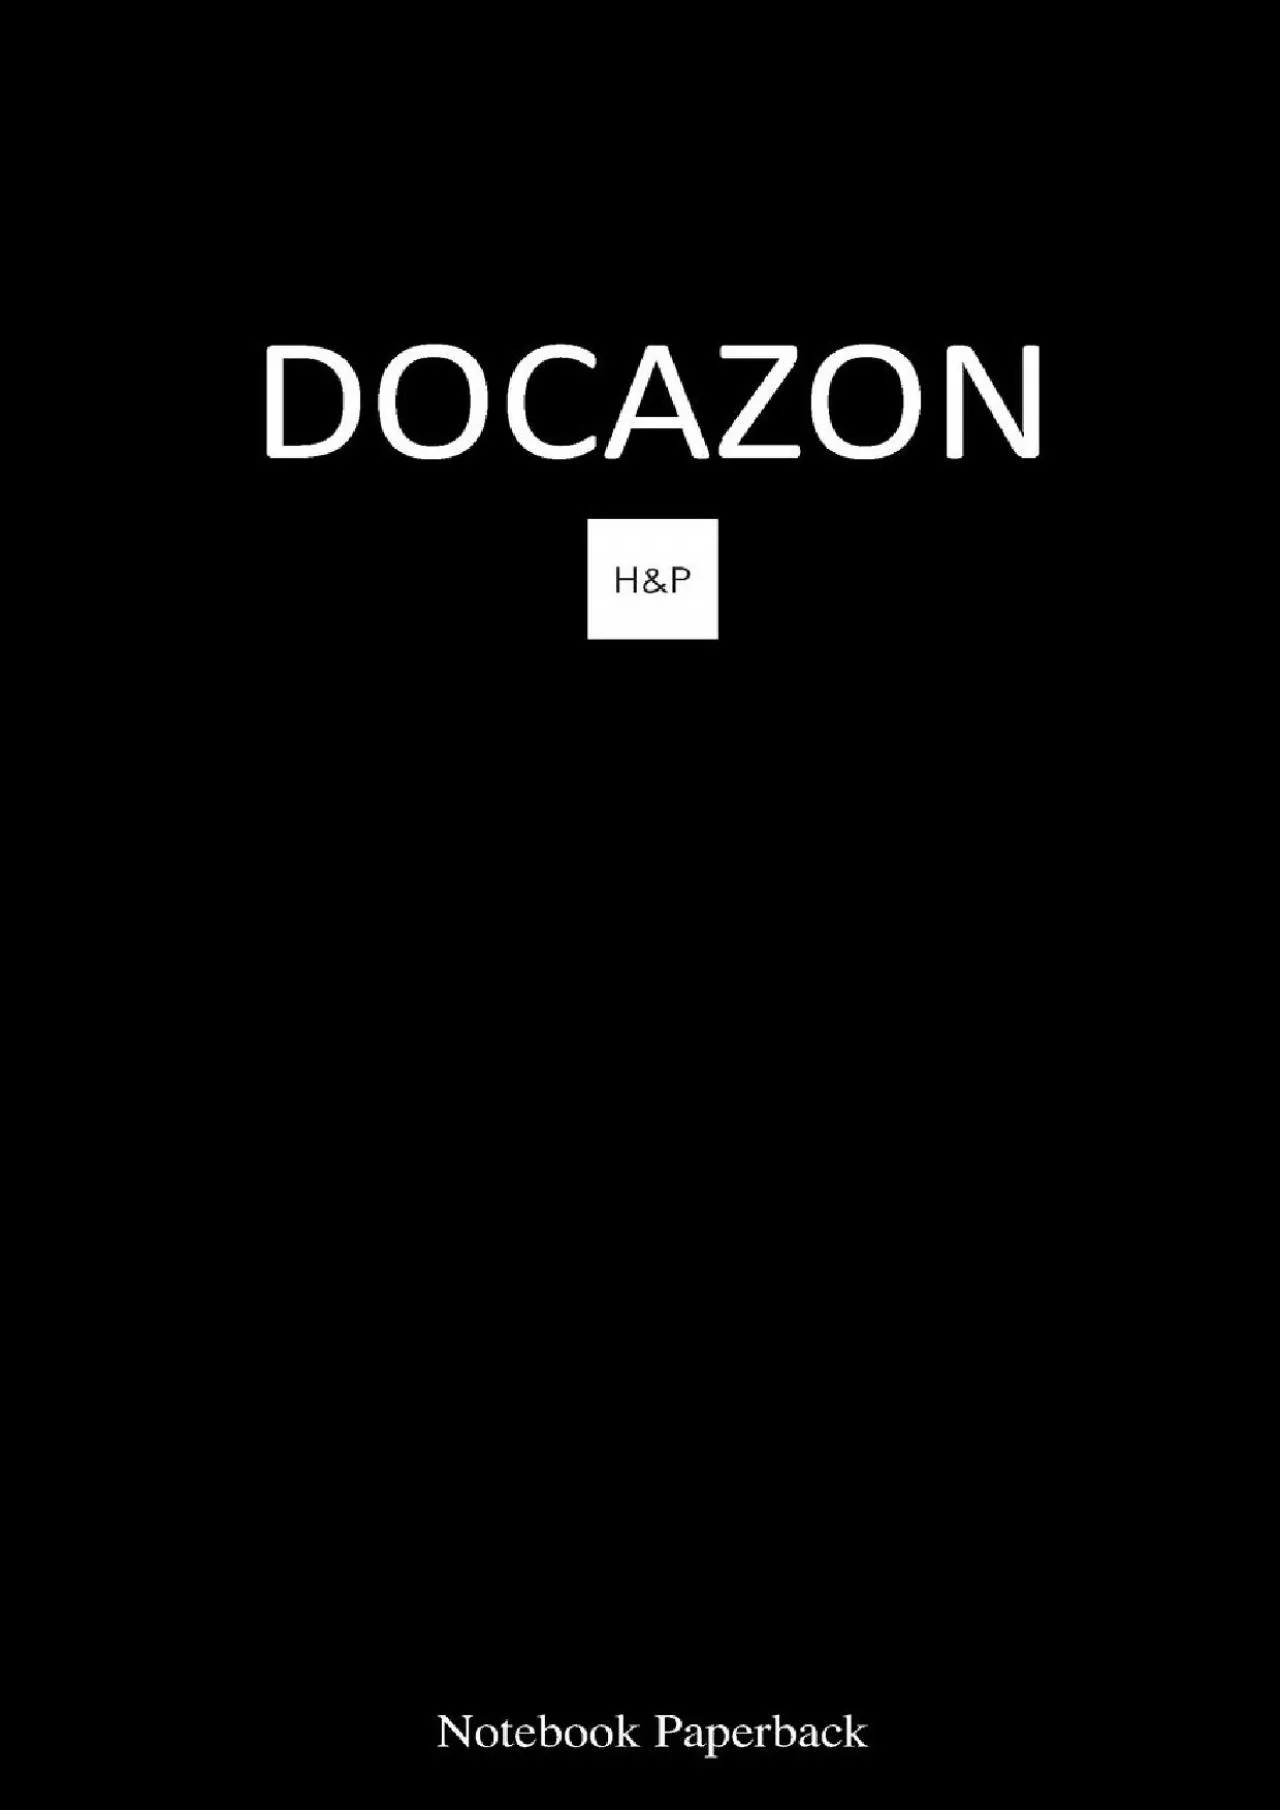 (EBOOK)-DOCAZON H&P Notebook (Paperback): The Ultimate Medical History & Physical Exam